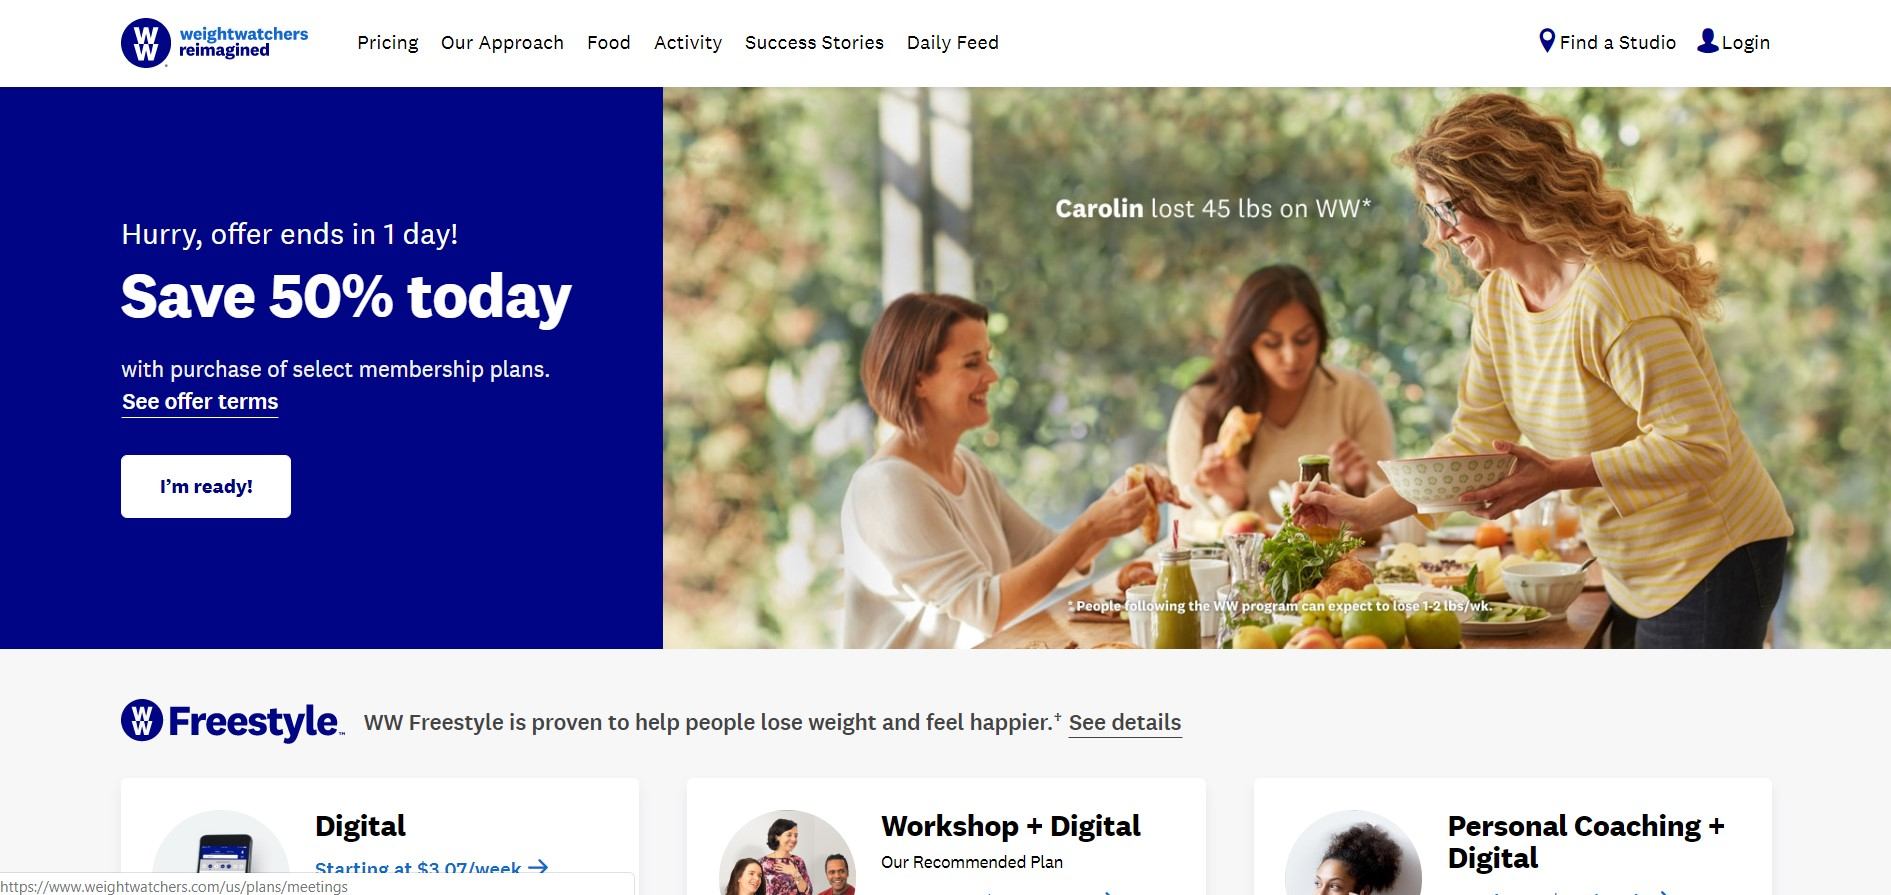 This Weight Watchers screenshot includes a photo of a group of women smiling and eating a healthy meal together.